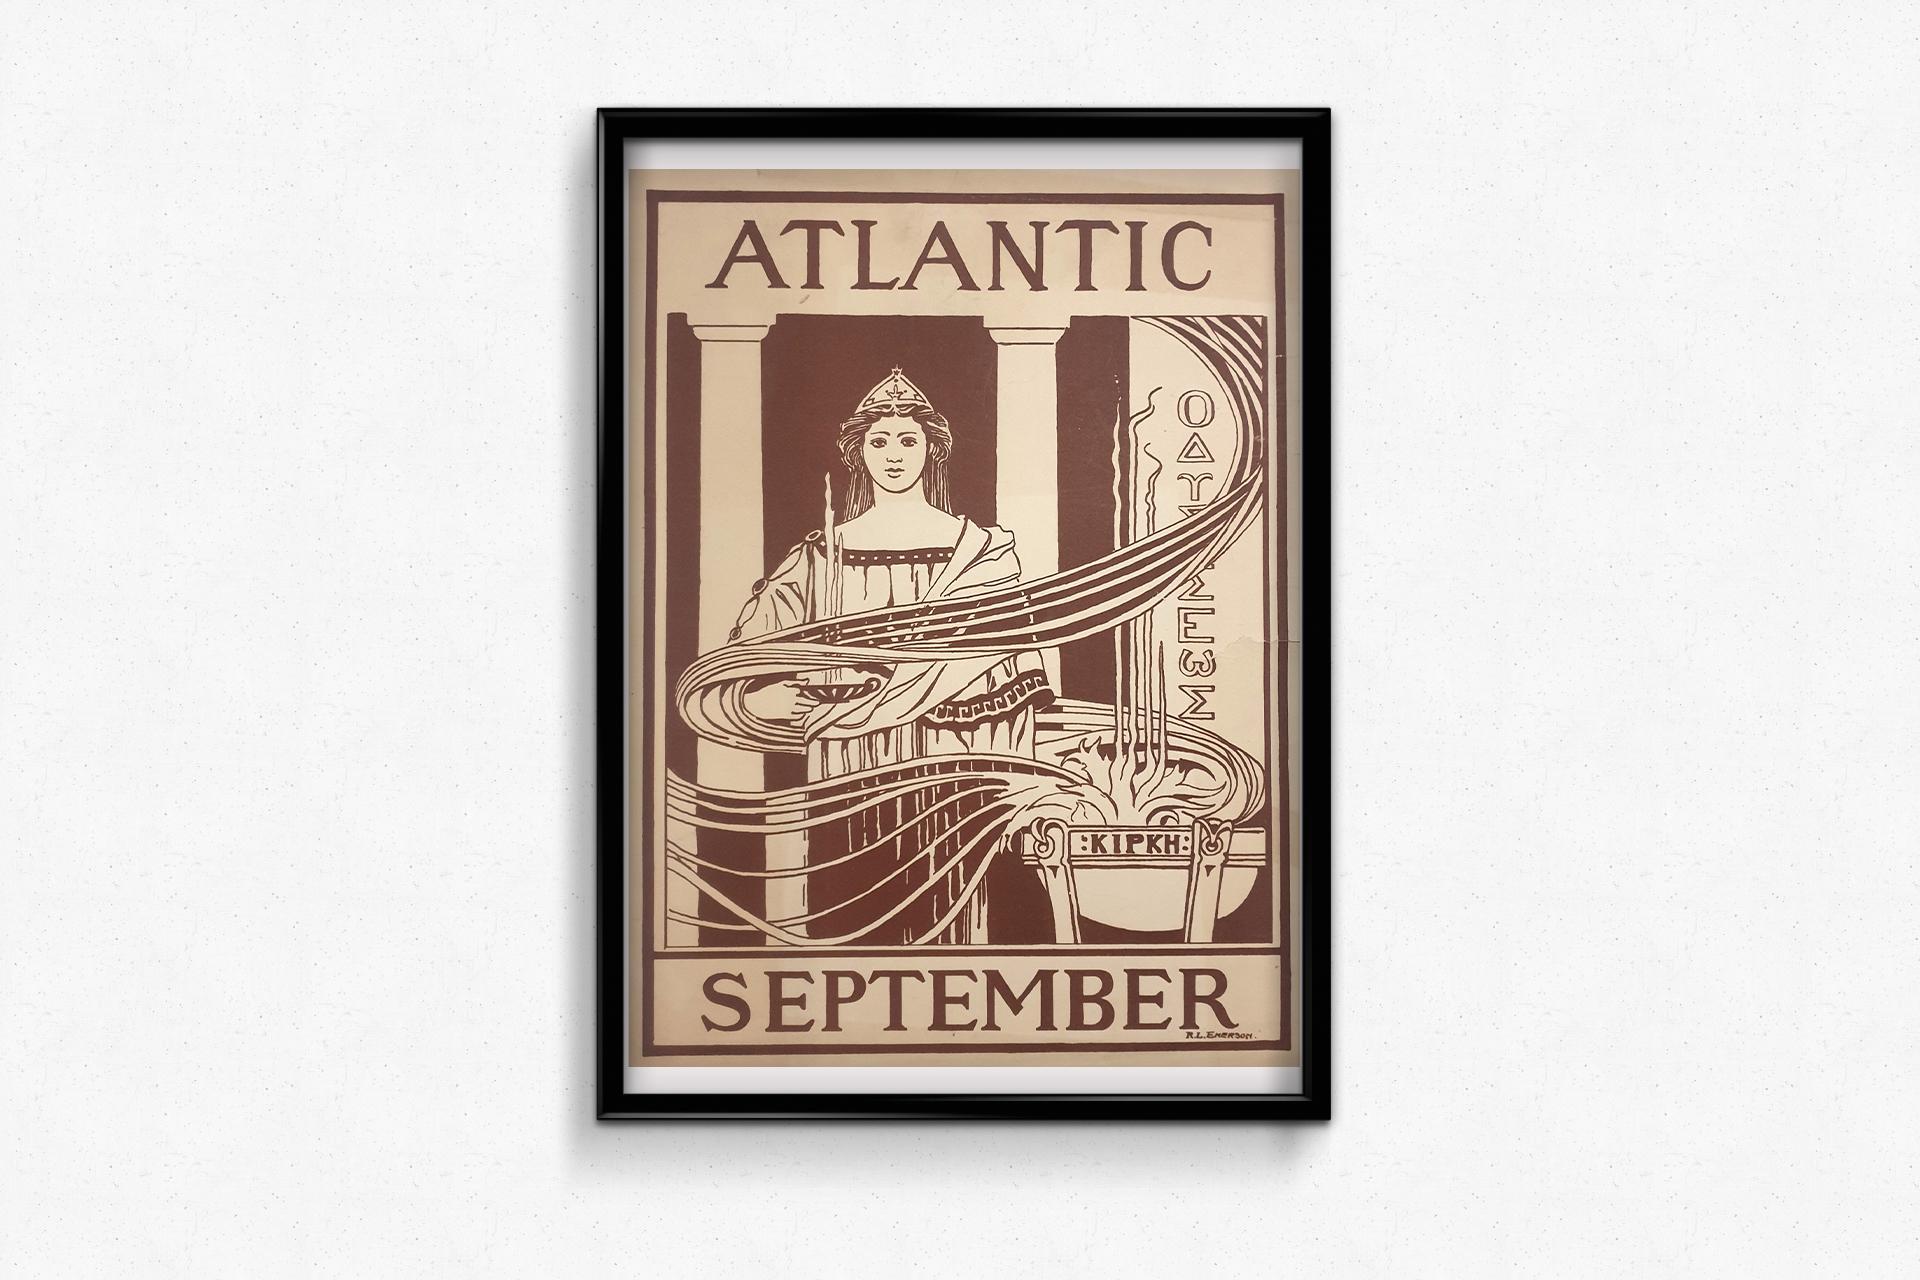 A magnificent 1895 color print by R.L Emerson 🇺🇸
He designed many of the covers for Atlantic, an American monthly cultural magazine founded in 1857 in Boston, Massachusetts.

Literature - Press - Mythology - Odyssey - Circé